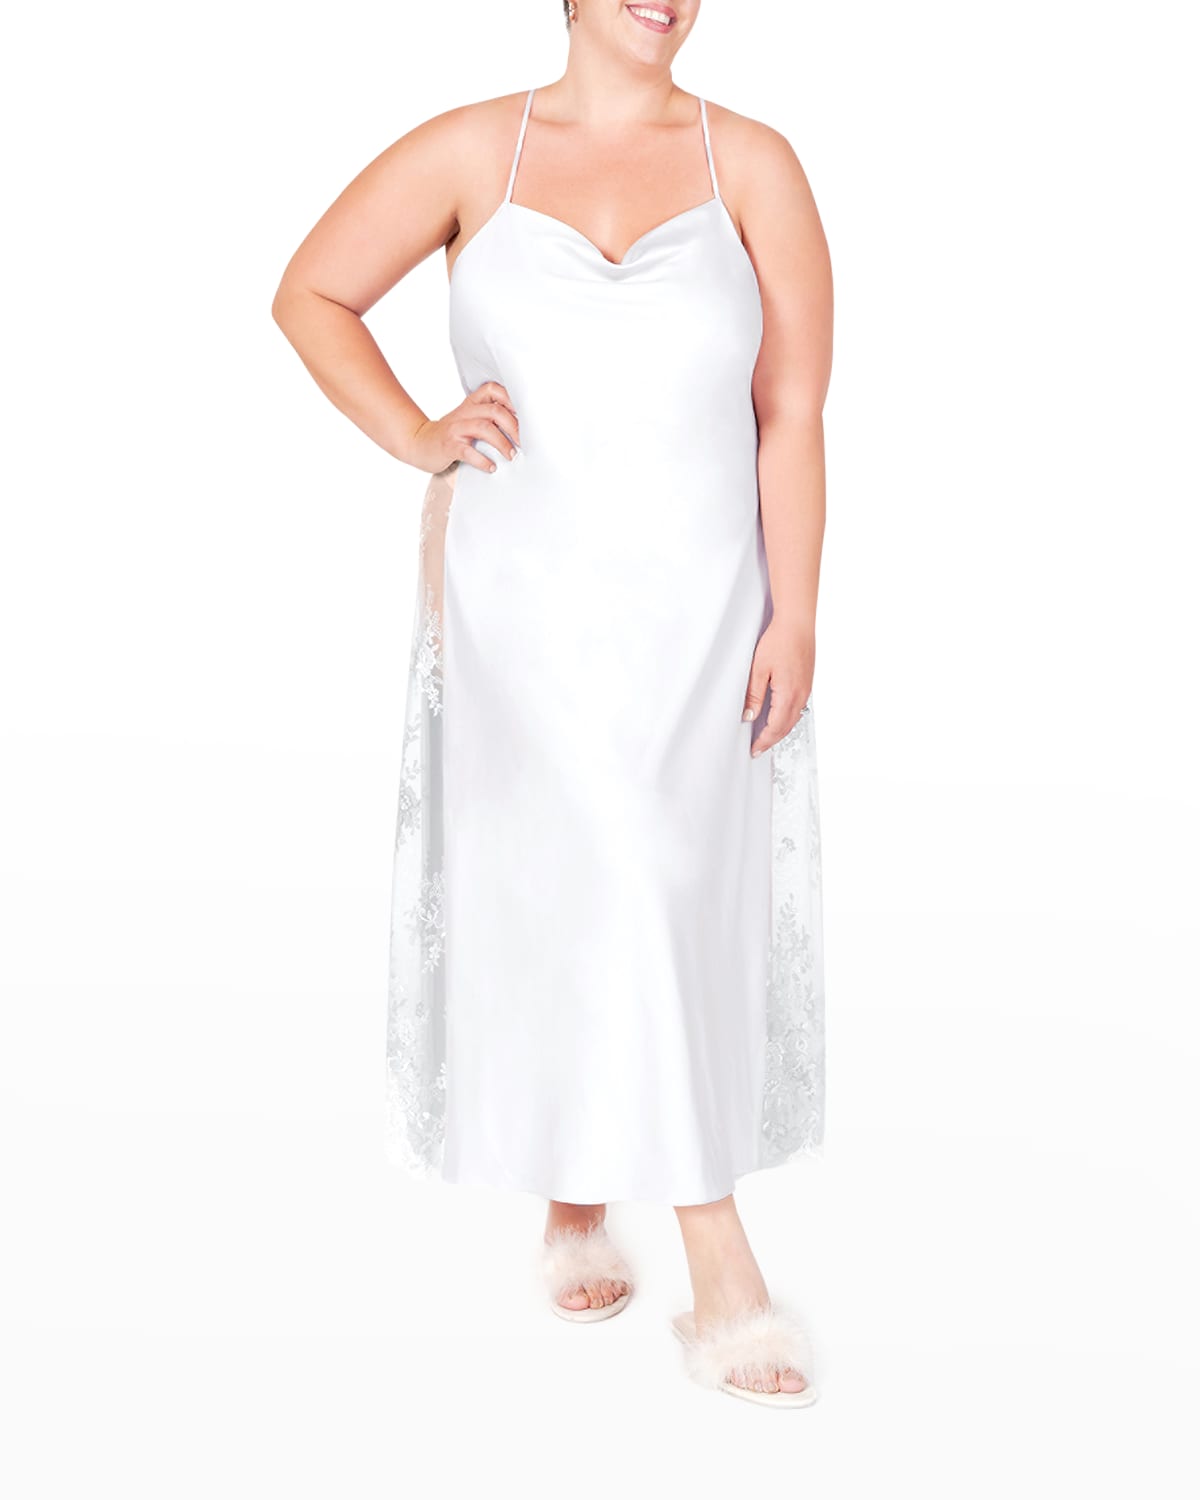 RYA COLLECTION PLUS SIZE DARLING LACE-INSET NIGHTGOWN